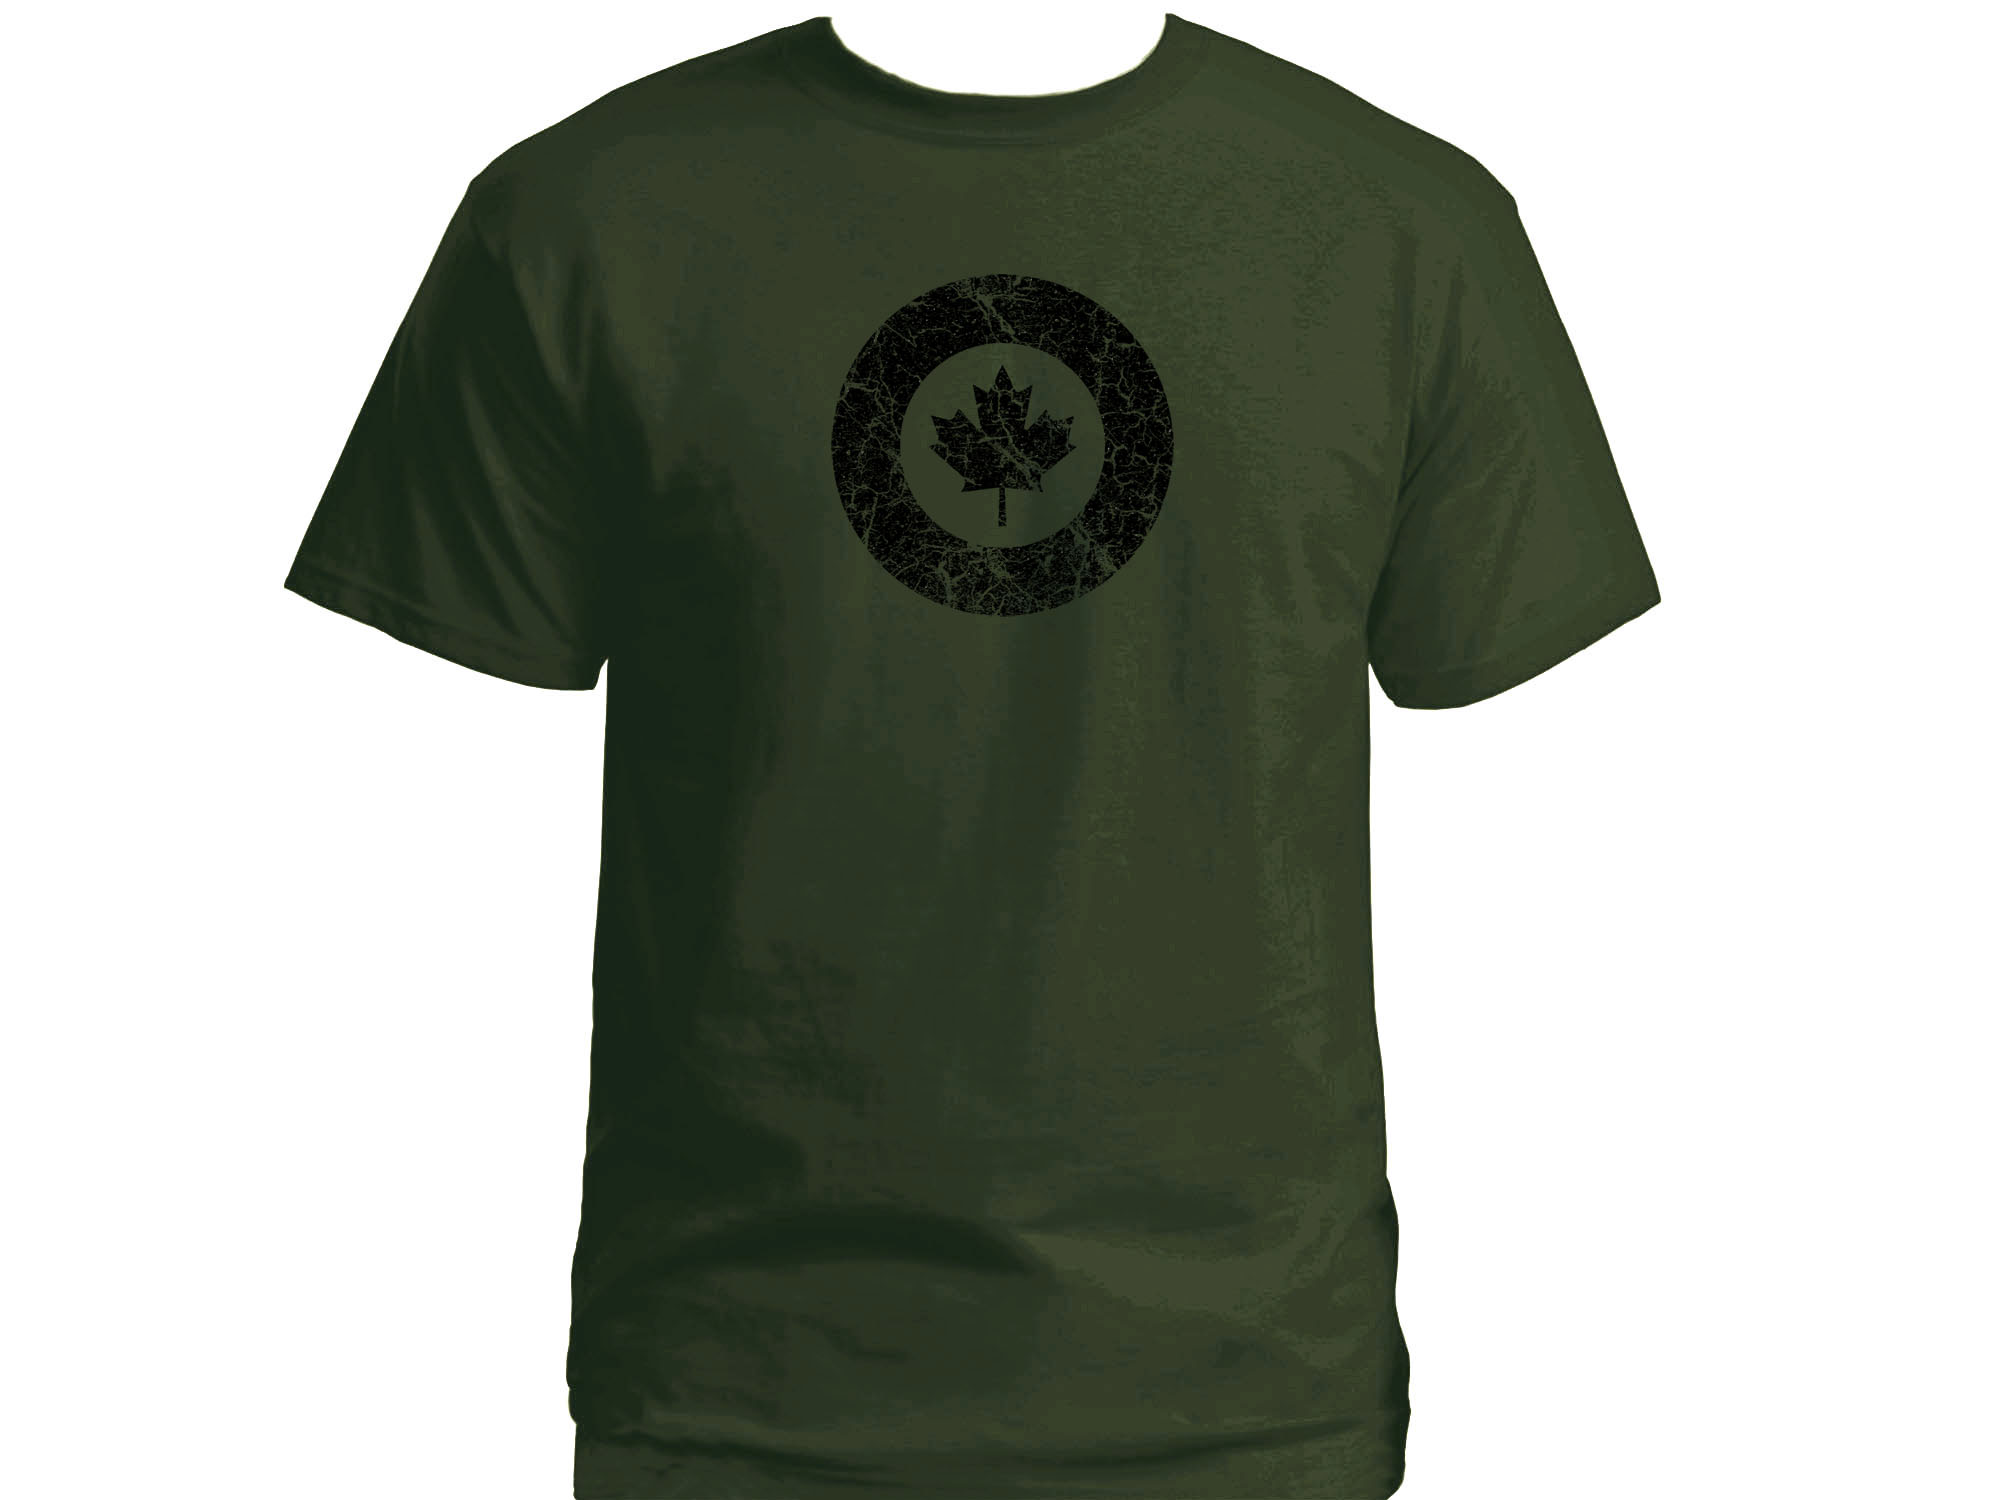 Canadian air force retro distressed look army green t-shirt